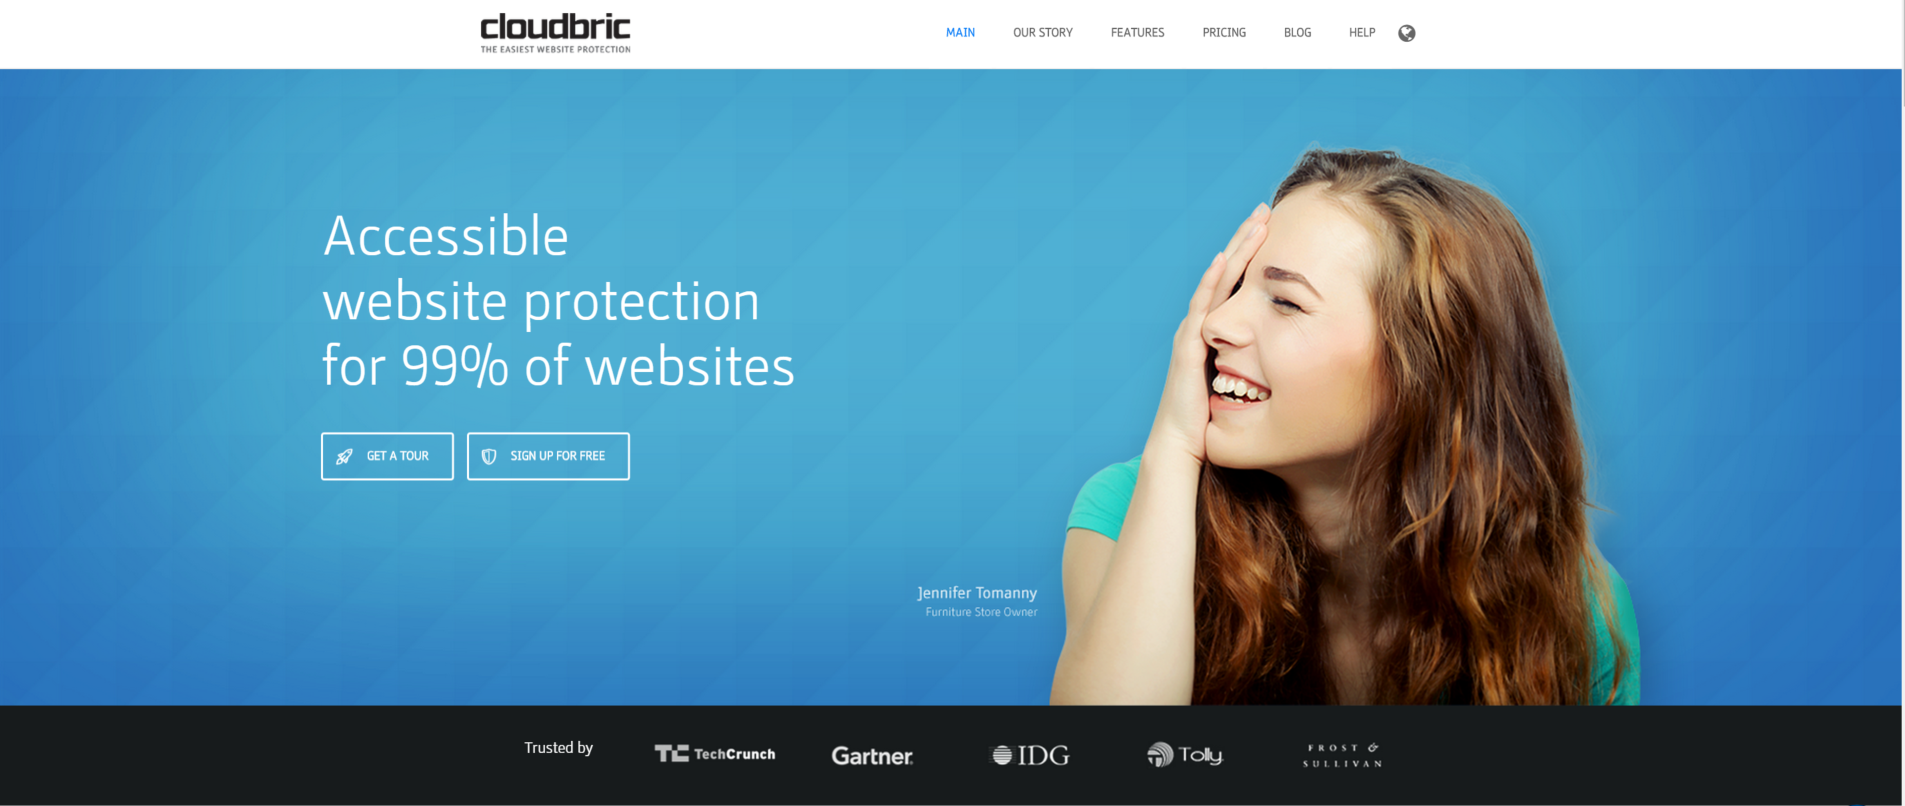 View of a girl touching her face on the Cloudbric homepage